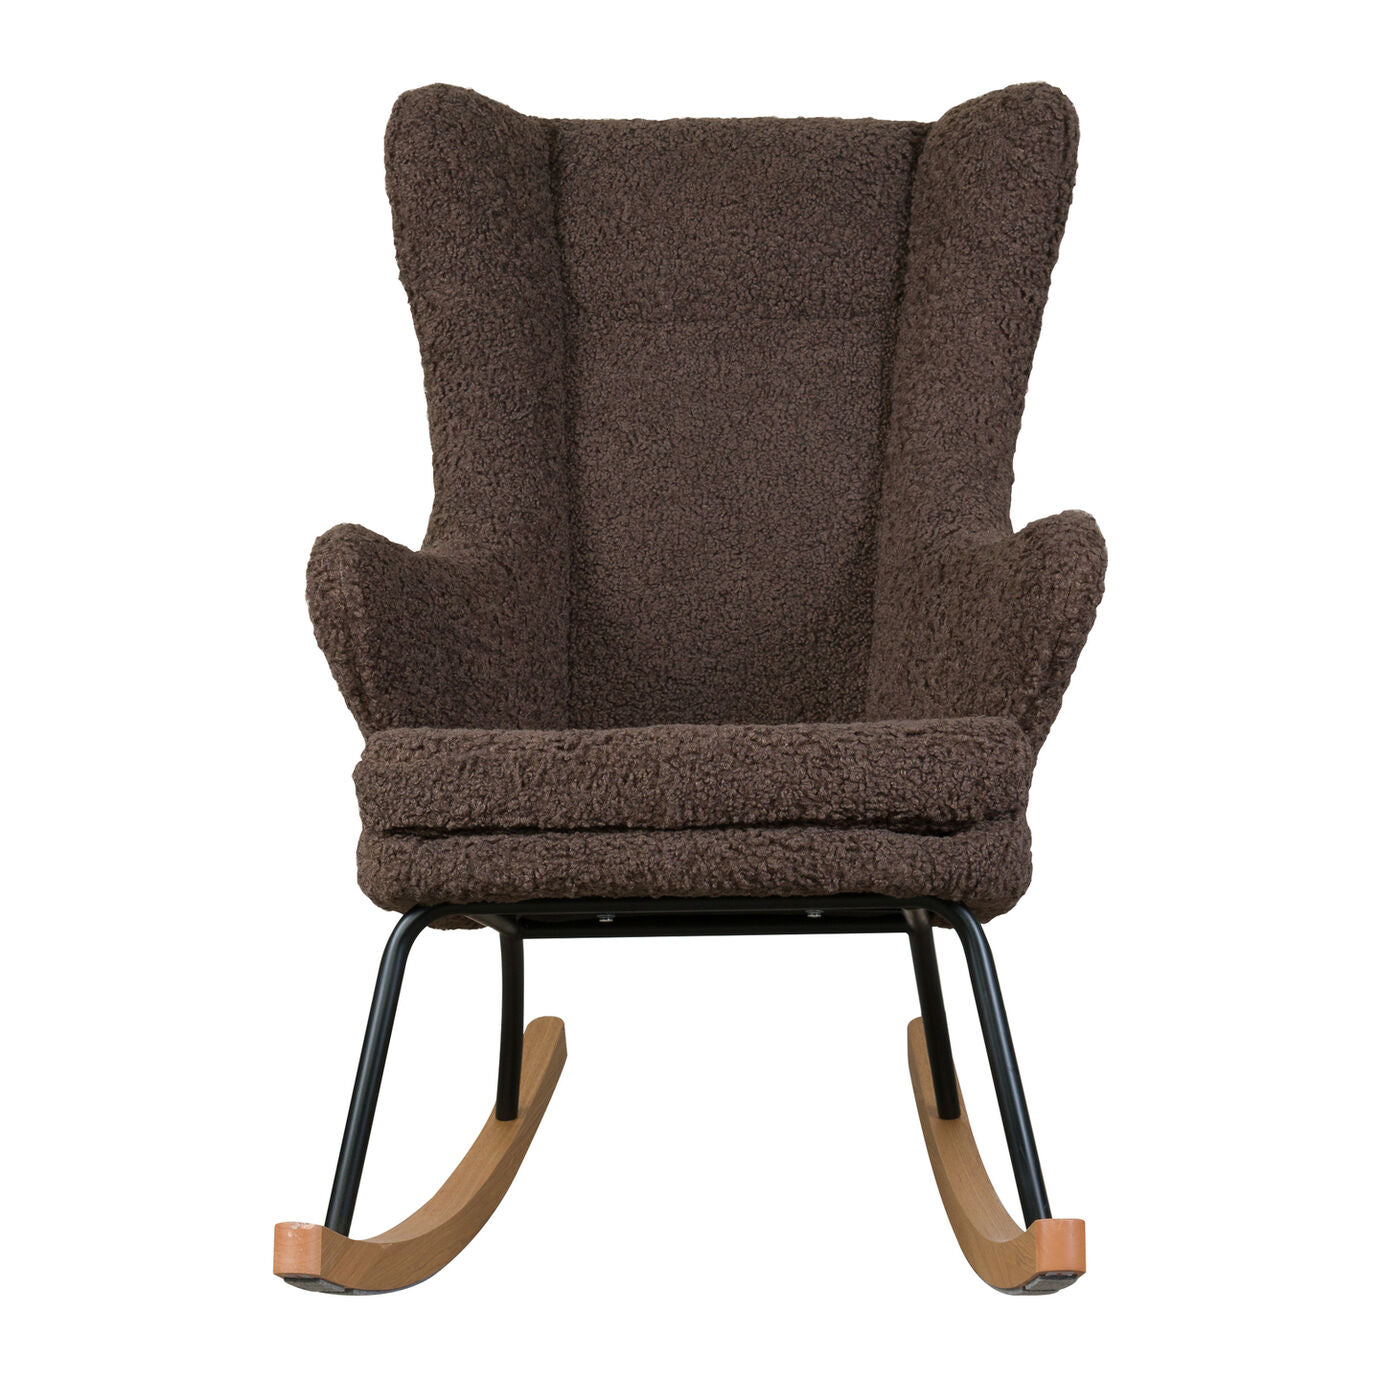 Quax - Rocking Adult Chair De Luxe - Bison